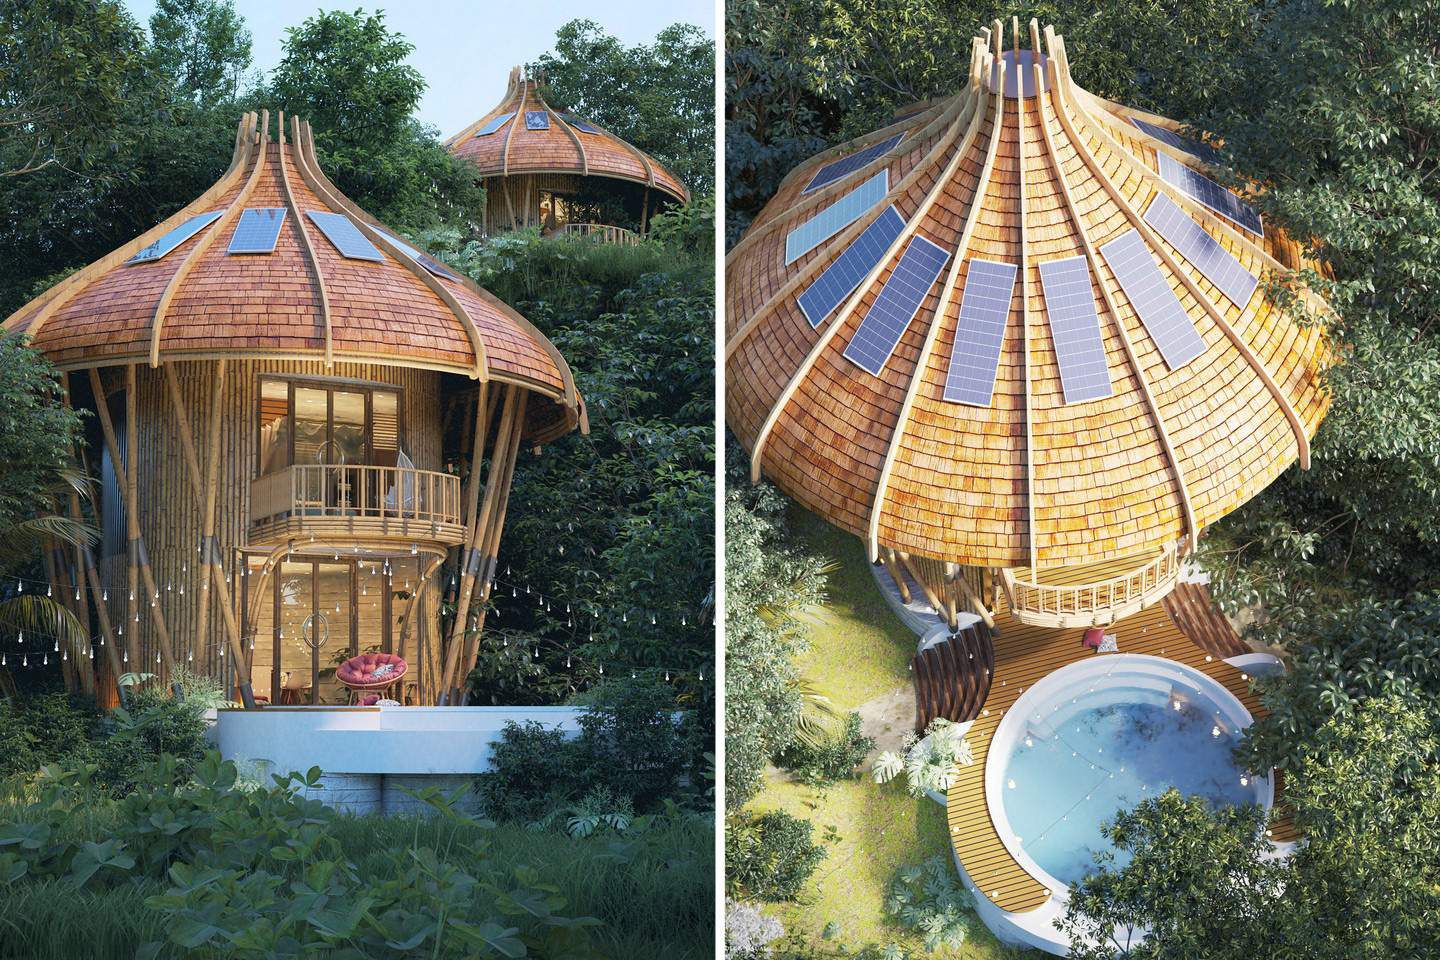 #These Mushroom-shaped duplex villas with their own swimming pool offer the ultimate glamping experience